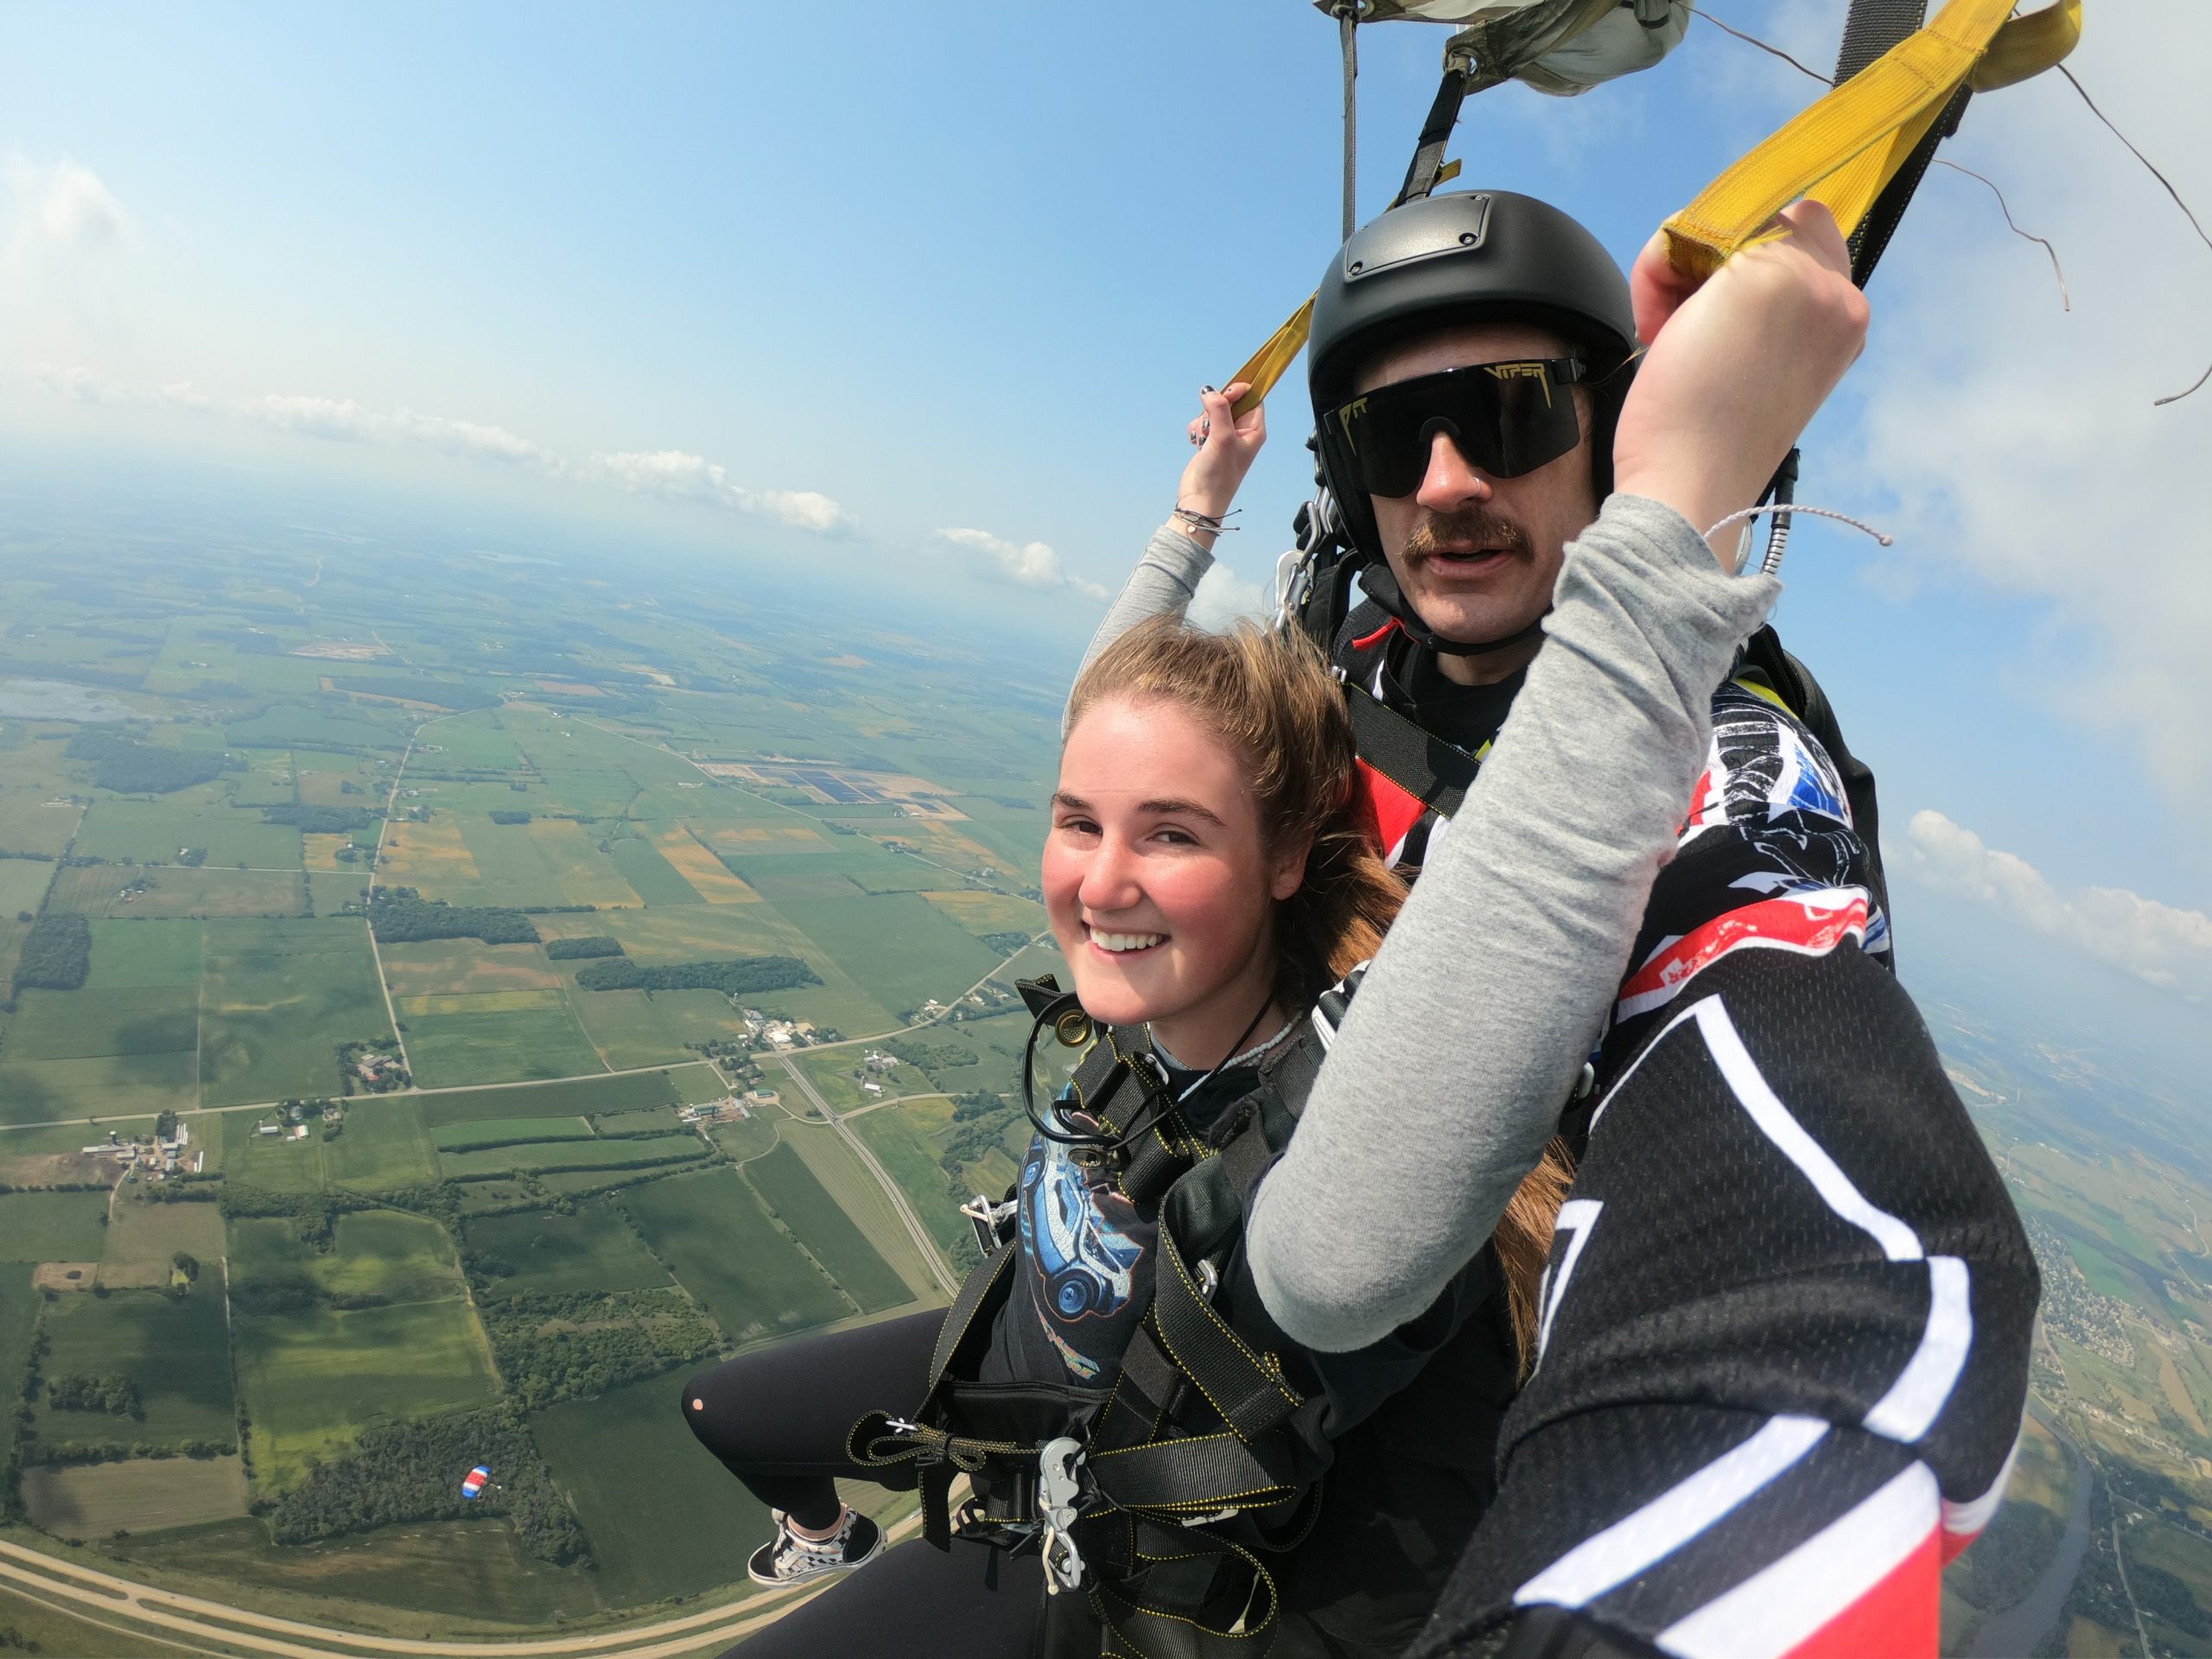 Instructor Andrew Leith doing a tandem skydive at Wisconsin Skydiving Center near Madison